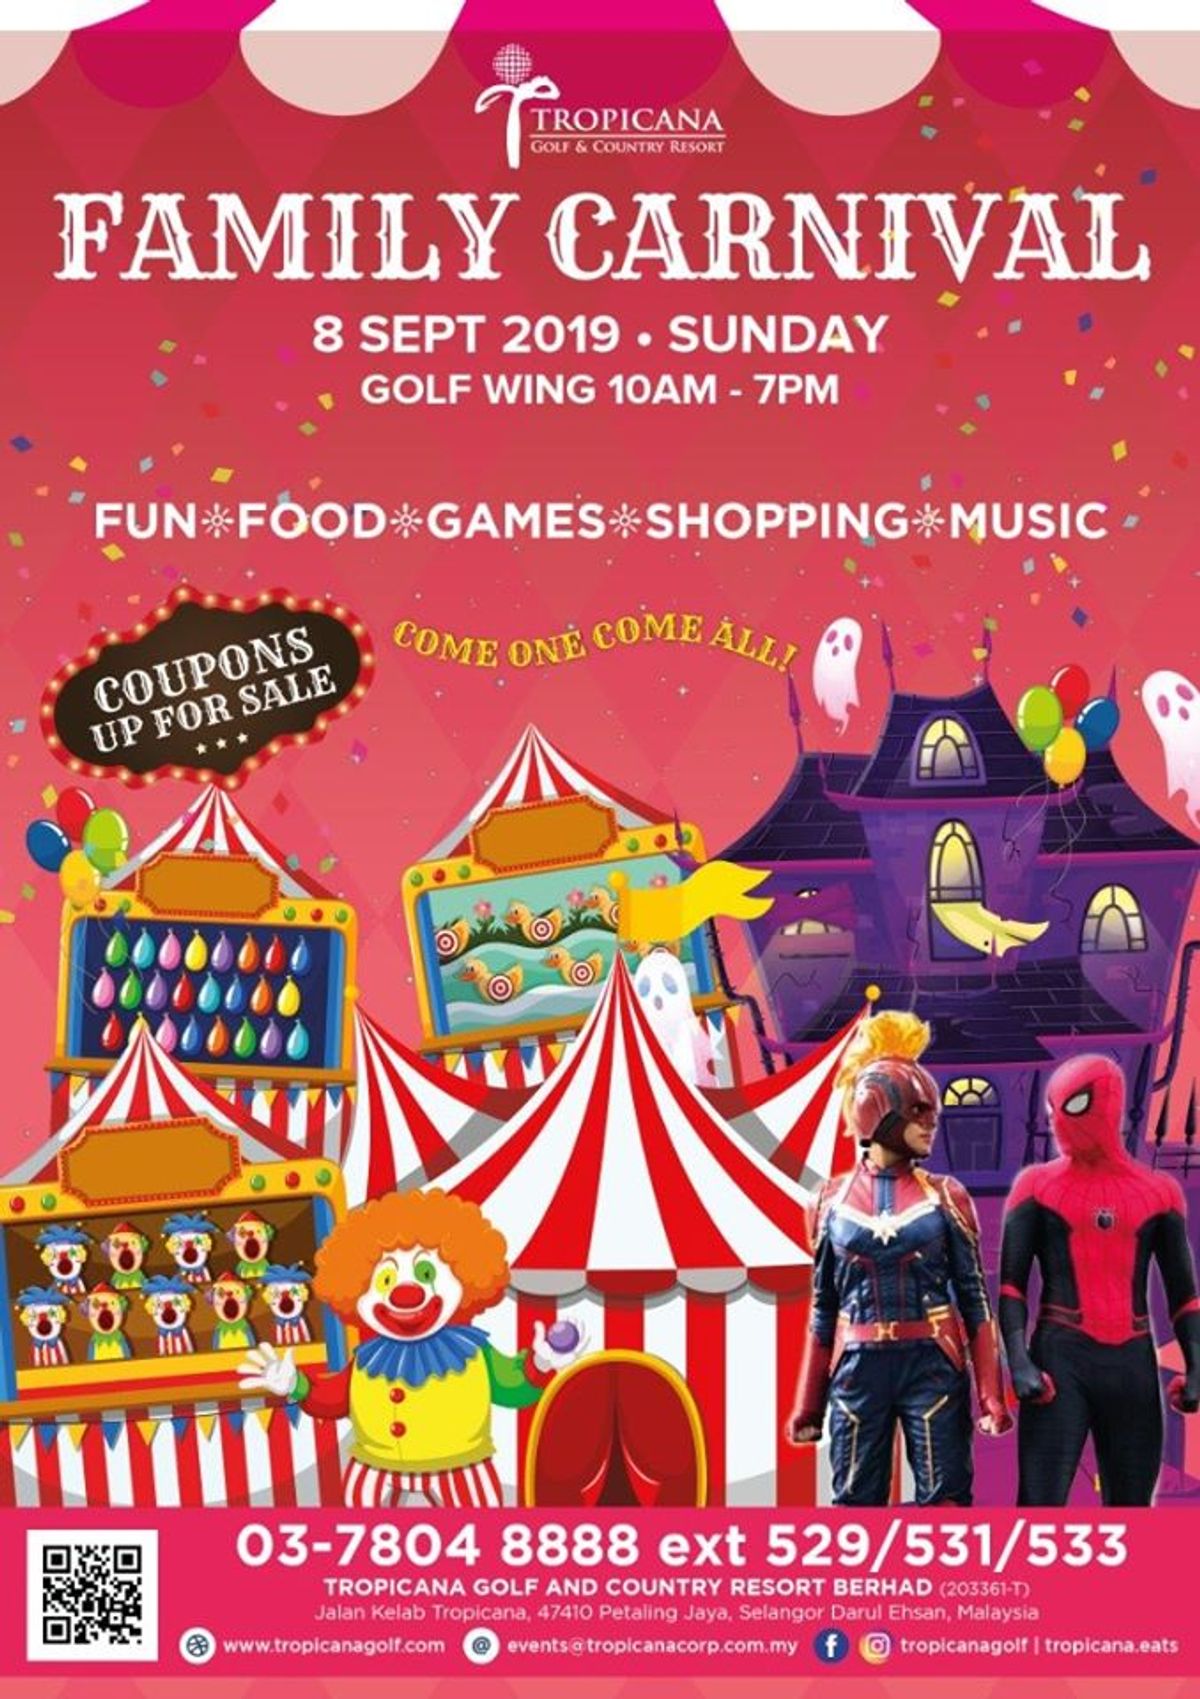 BIOCOCO will be at Tropicana Golf & Country Resort Family Carnival happening on 8 September 2019 (Sunday)